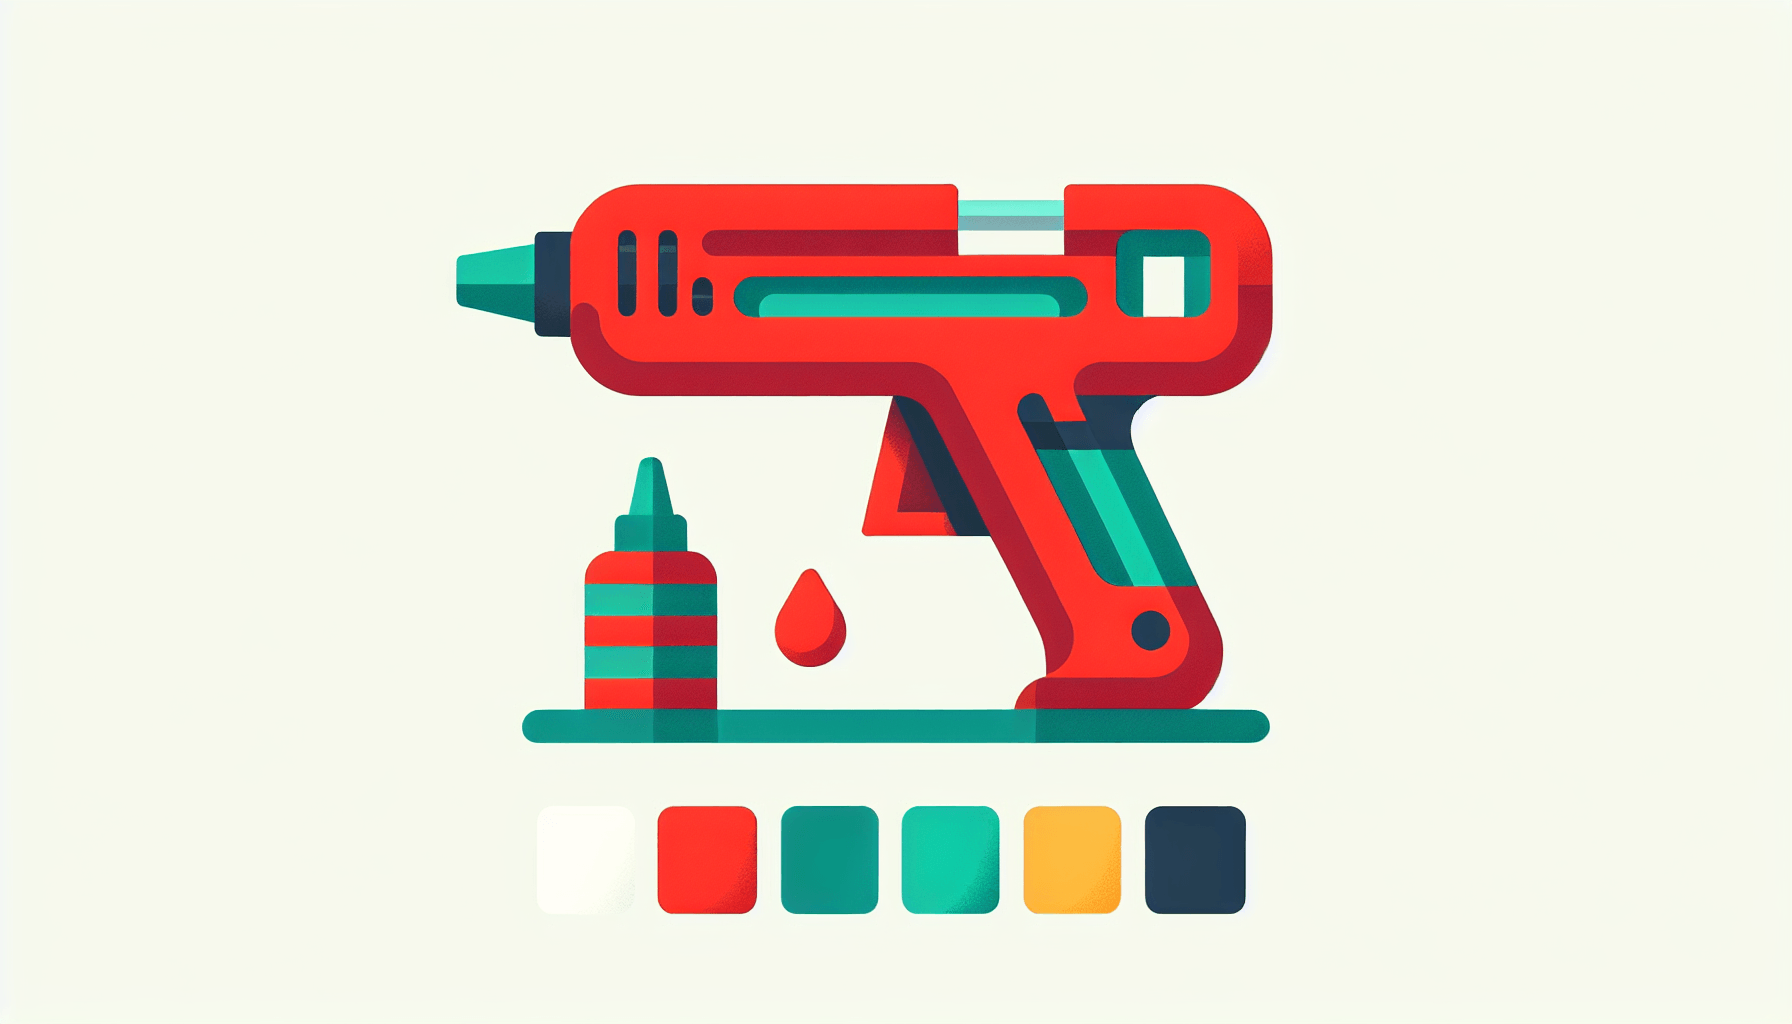 Glue gun in flat illustration style and white background, red #f47574, green #88c7a8, yellow #fcc44b, and blue #645bc8 colors.